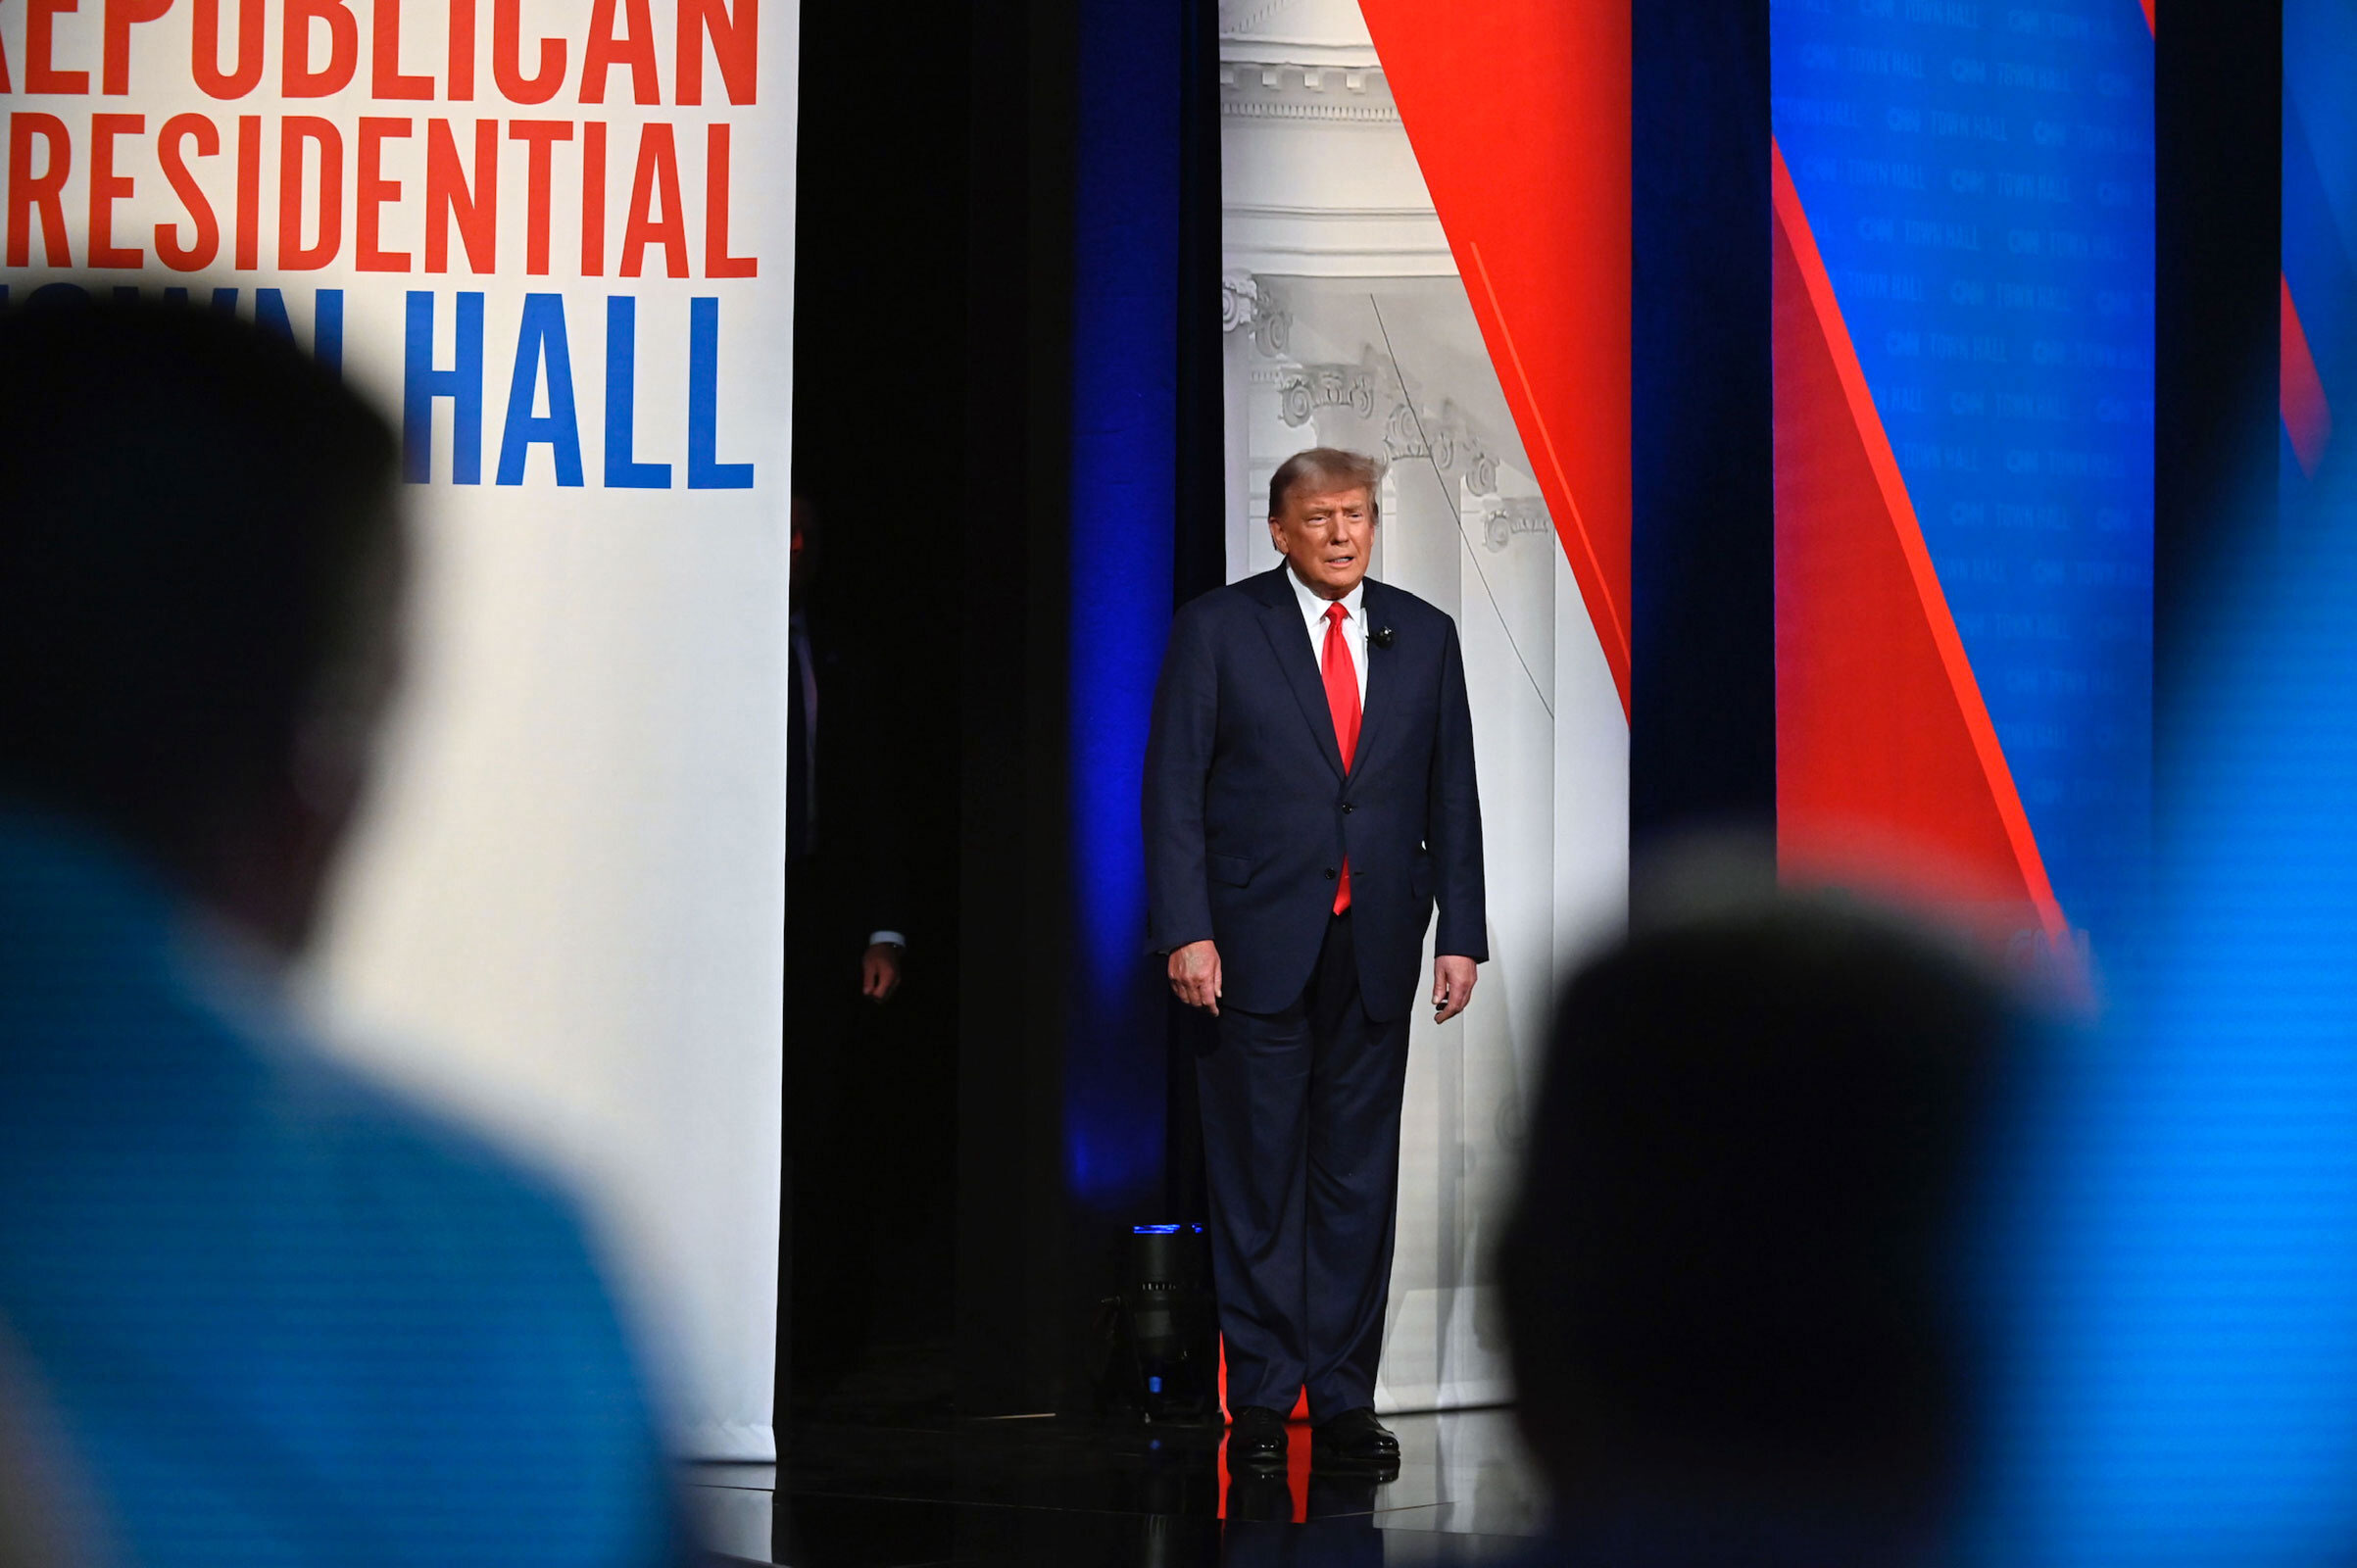 Trump walks on stage at the start of the town hall.